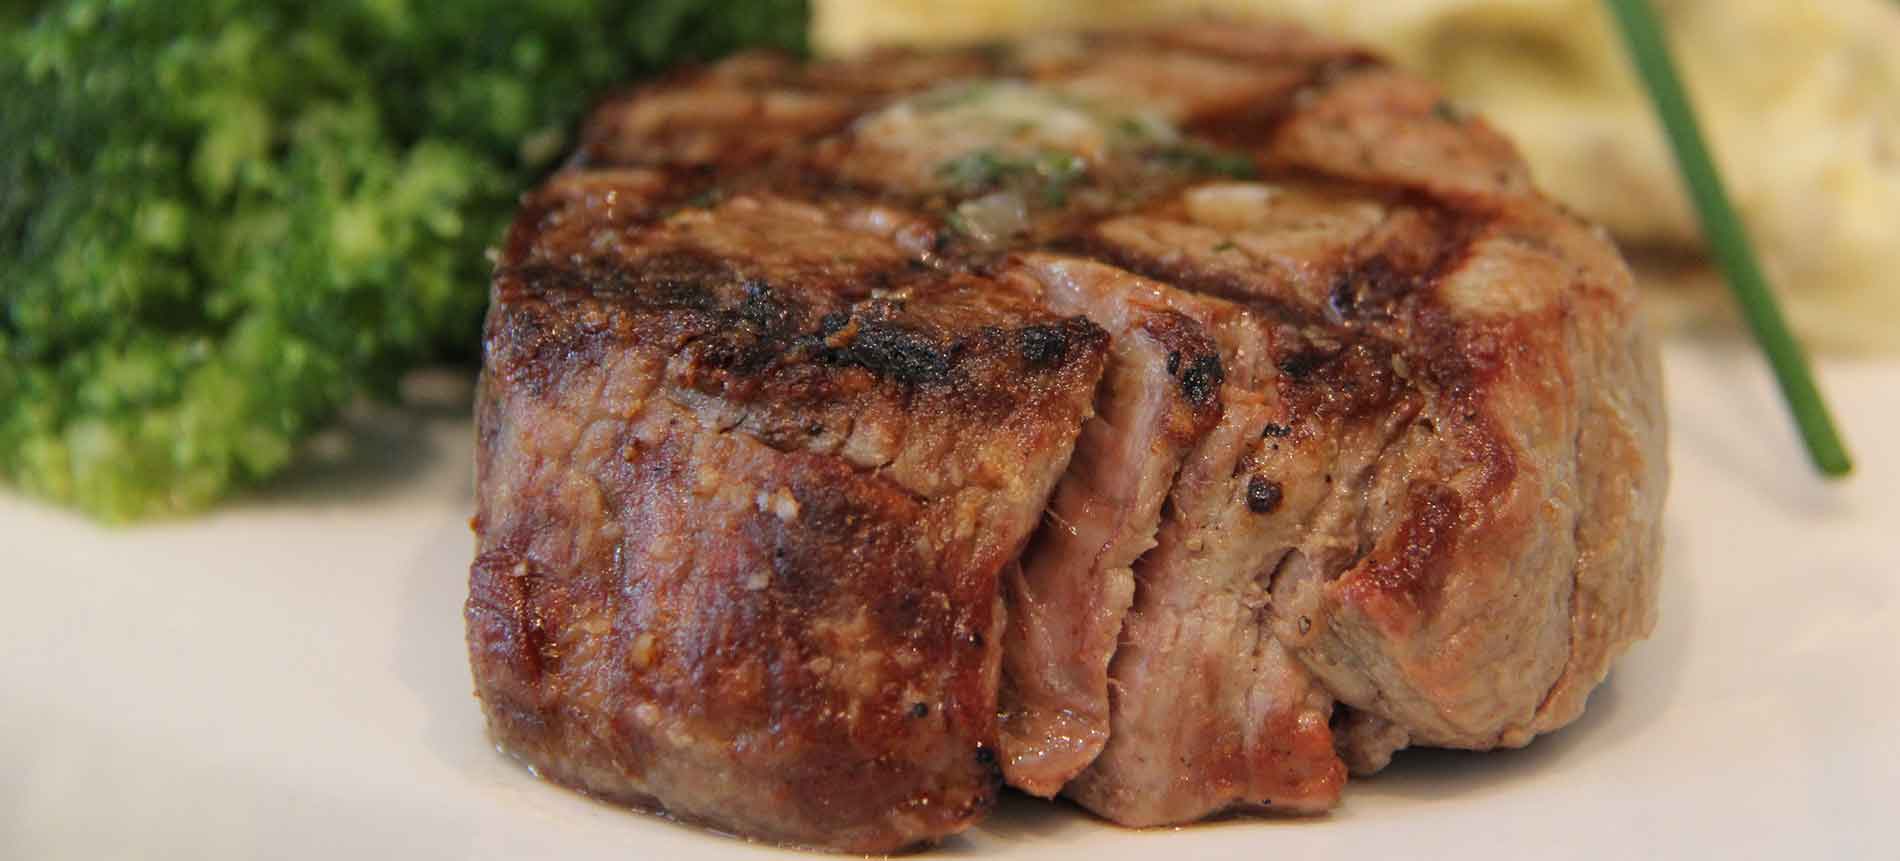 Enjoy delicious filet mignon at The Club at Candler Hills in Ocala, FL